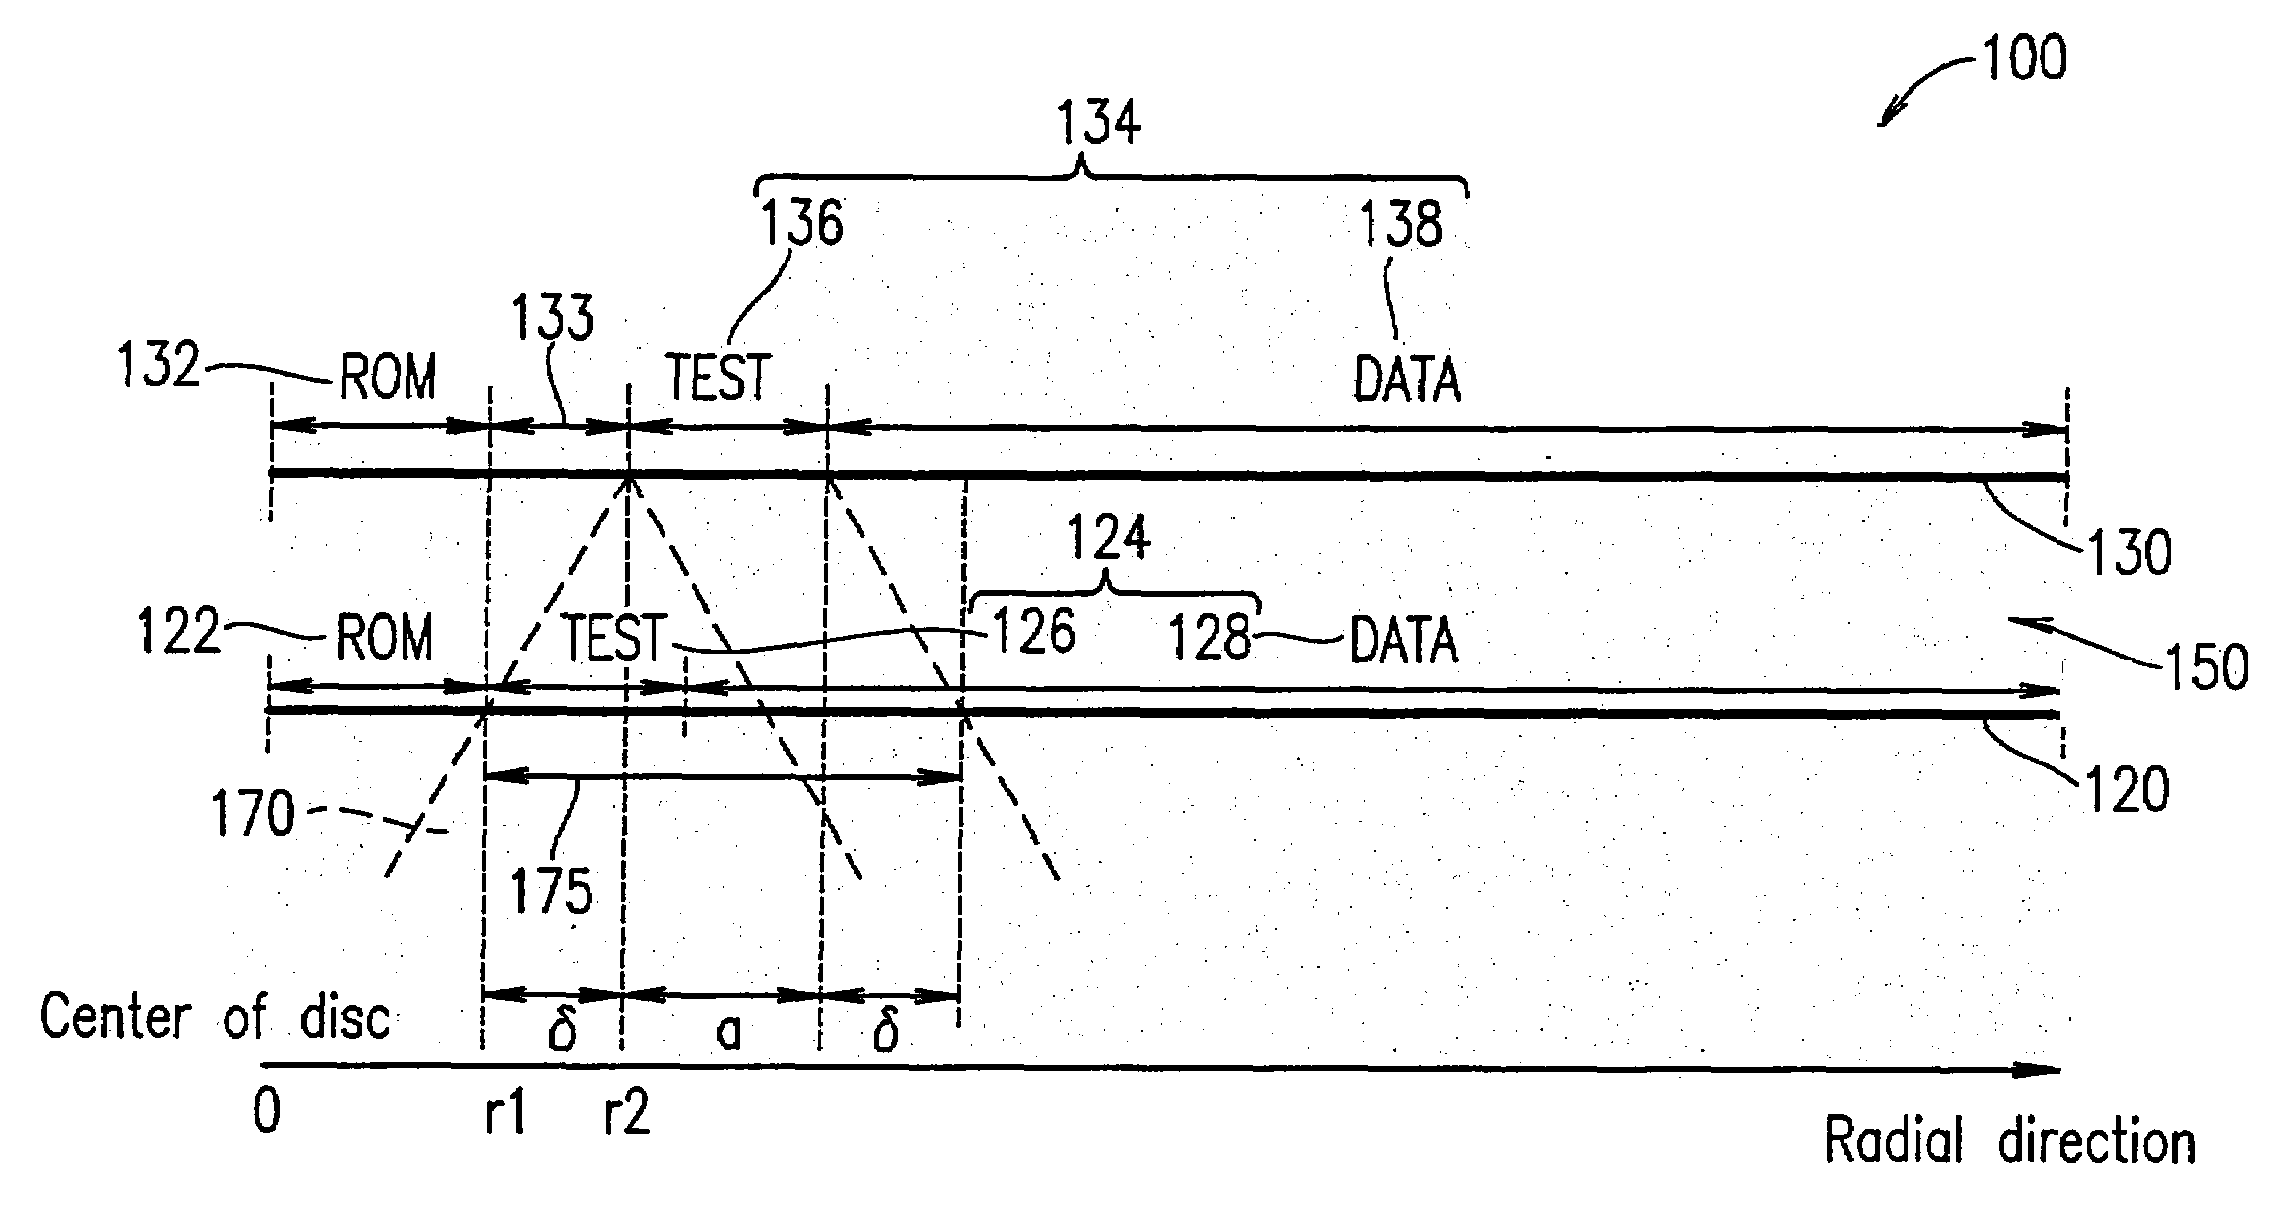 Optical information recording medium containing a plurality of recording layers provided with characteristics to achieve optimum recording conditions